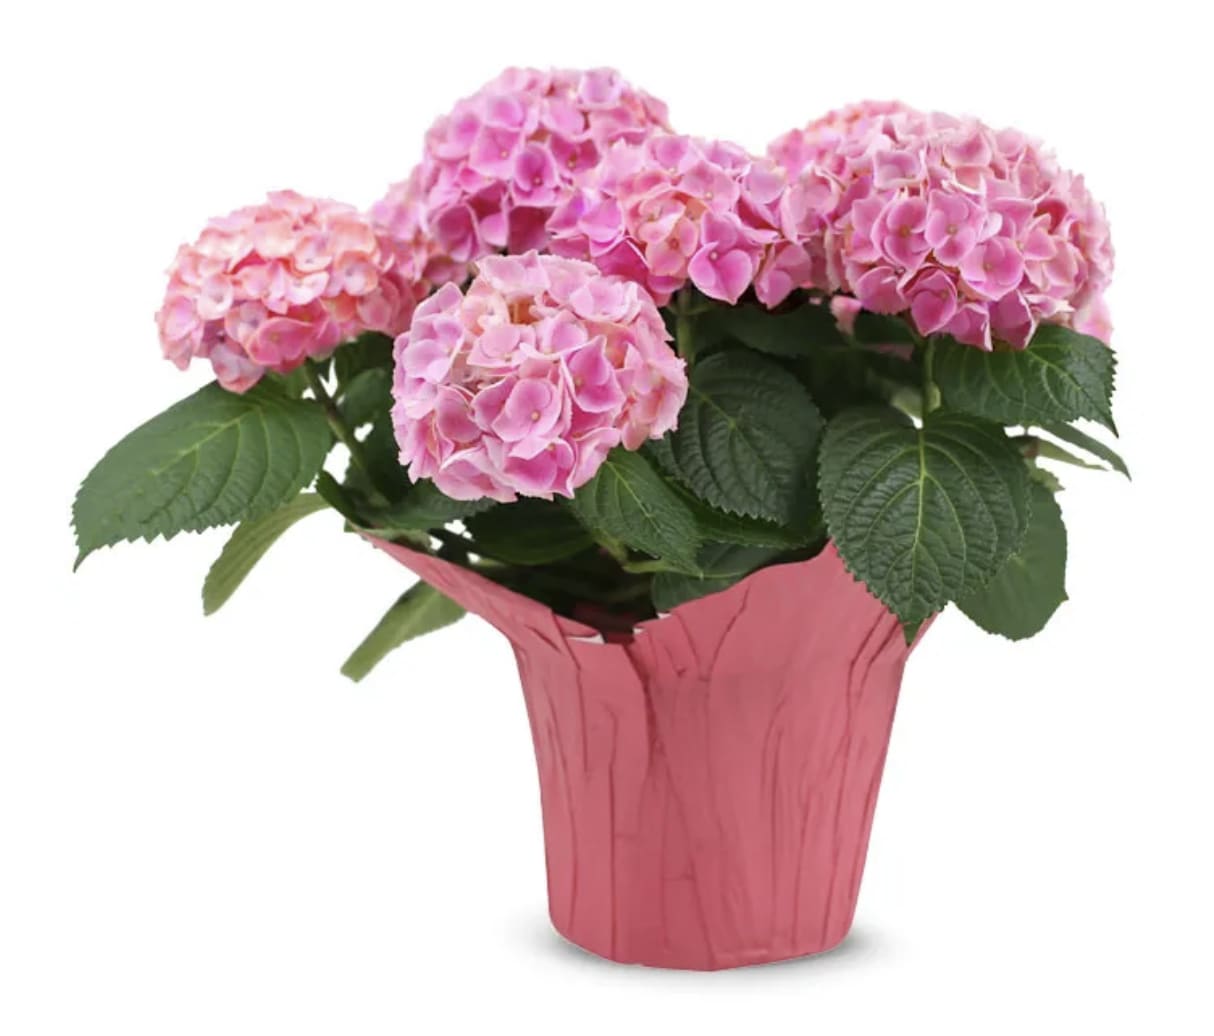 Pink Hydrangea Plant - Stunning pink hues make this blooming hydrangea plant the perfect gift! In addition to being bold and beautiful, it is fantastically easy to care for! Simply make sure to give it plenty of water and sunlight; it can even be replanted outside in many climates.